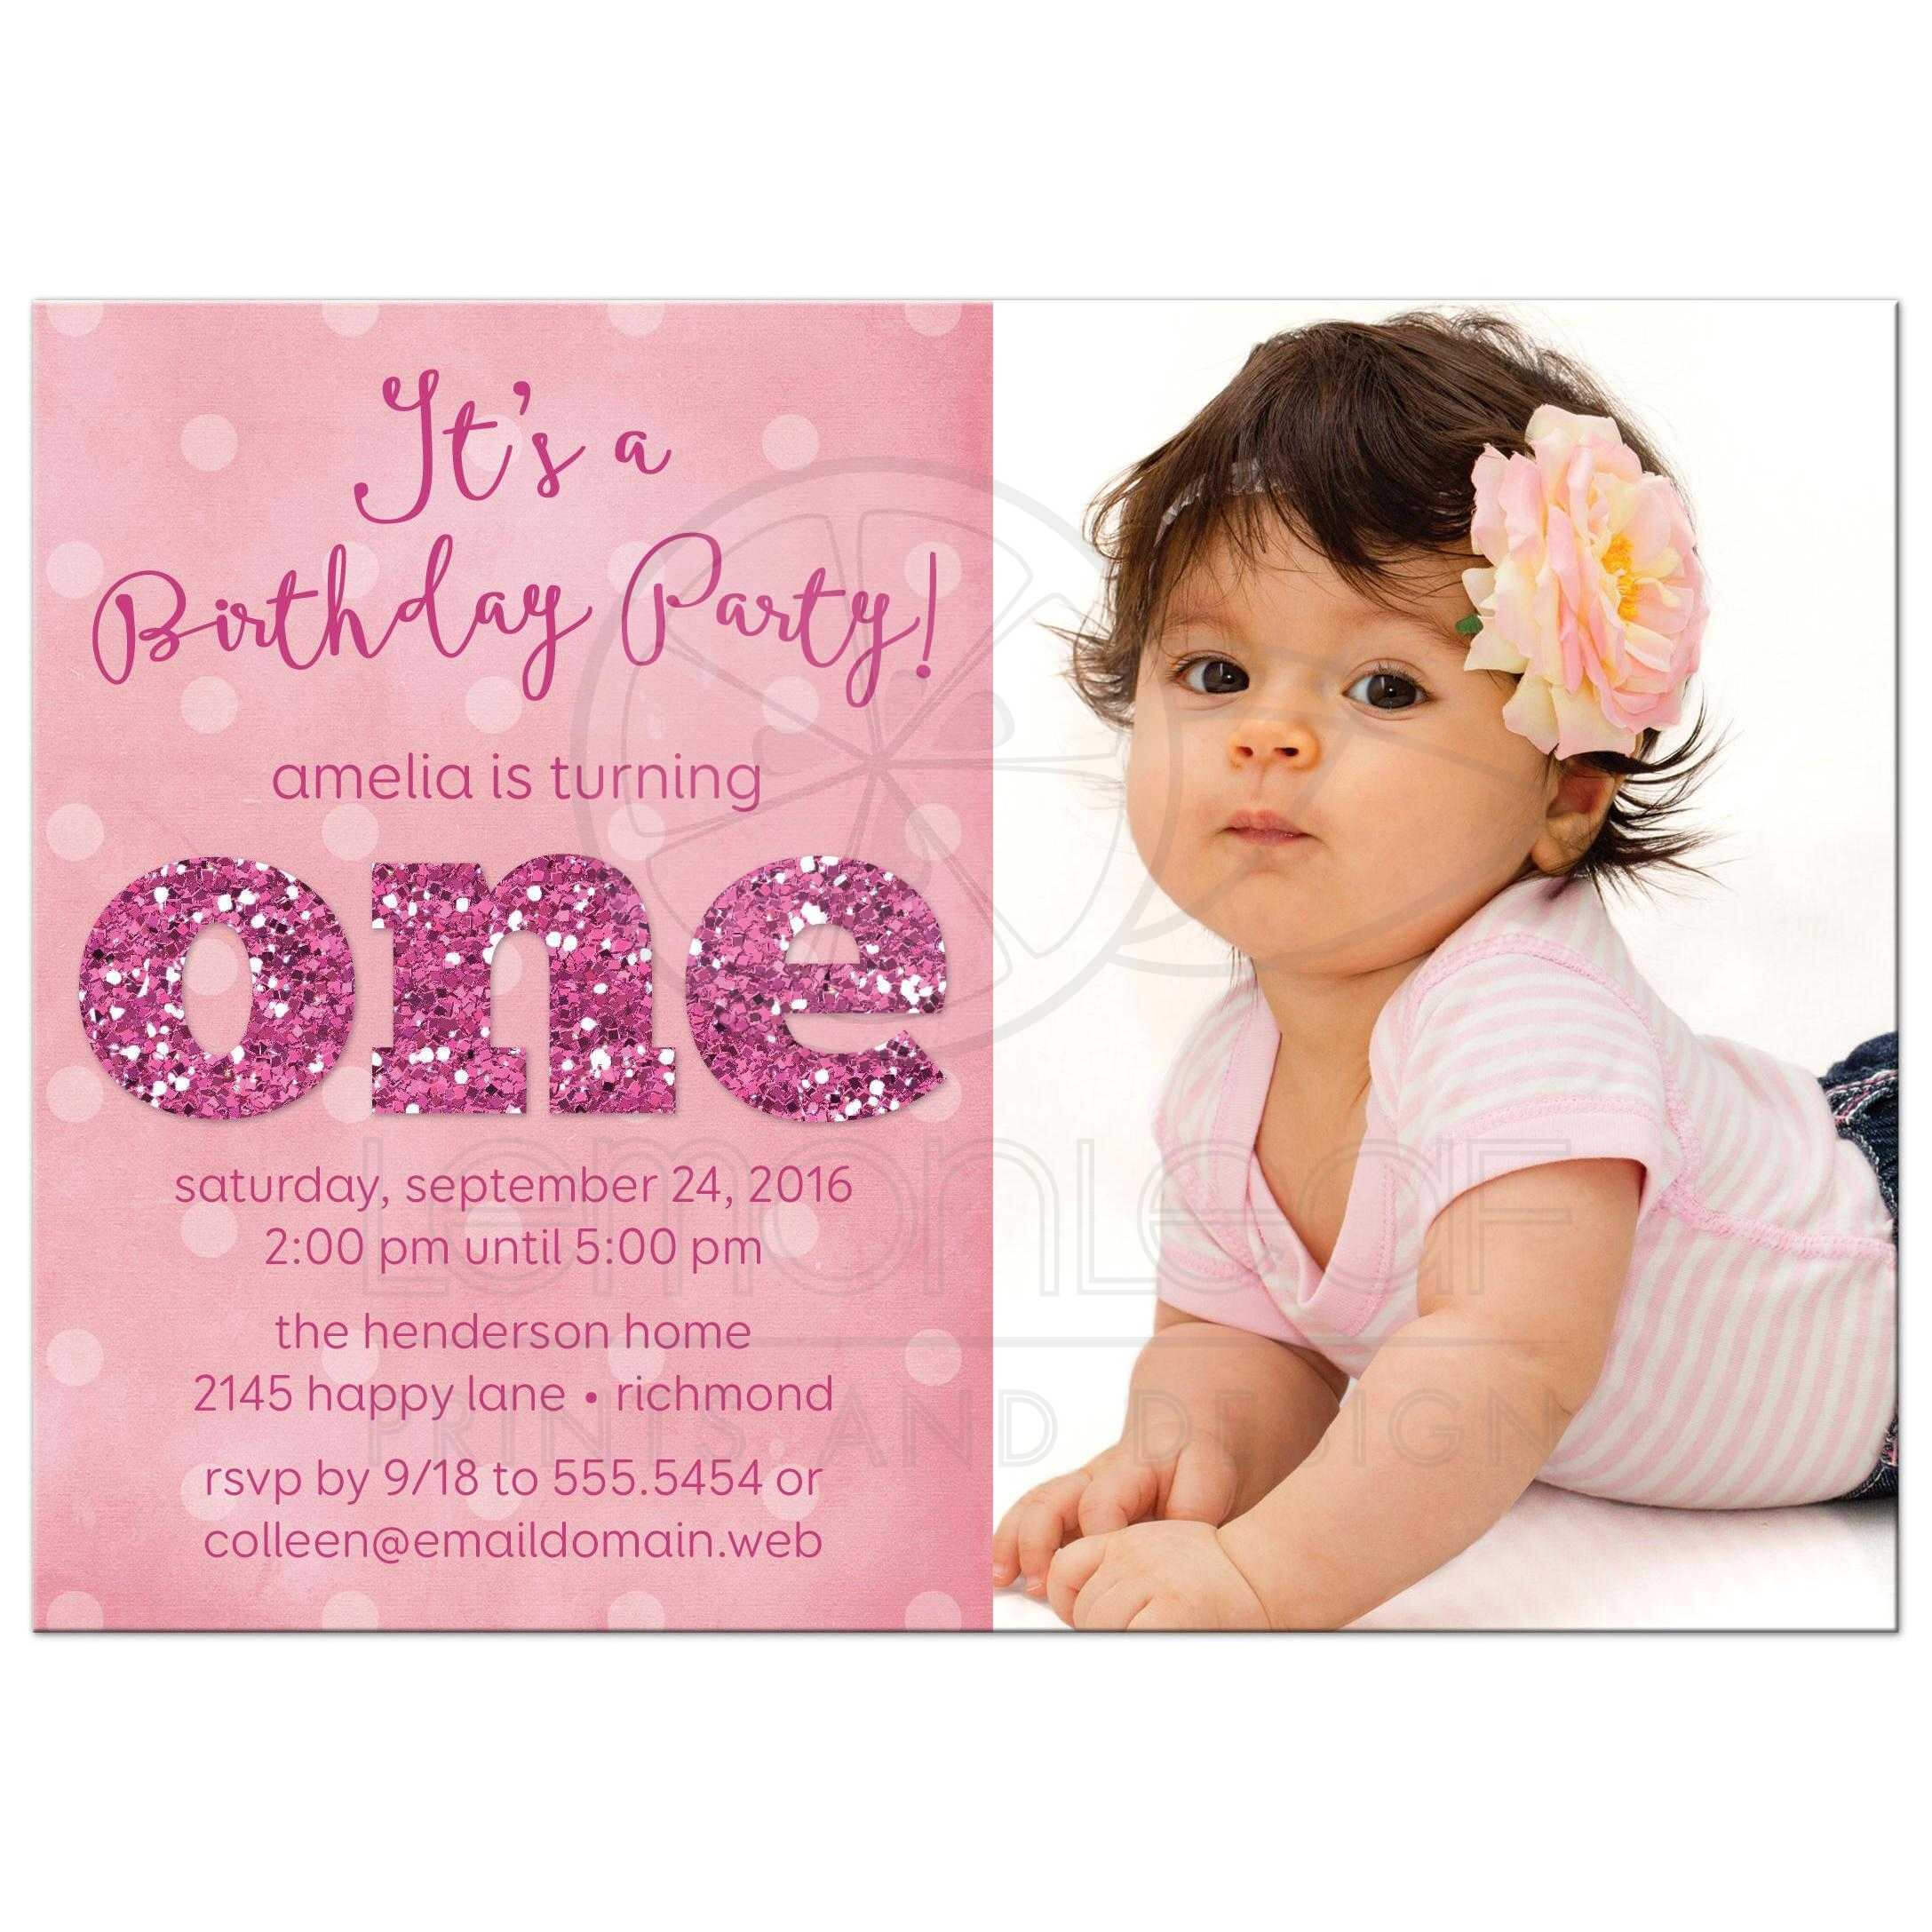 Baby Birthday Party Invitations Calep midnightpig co With First